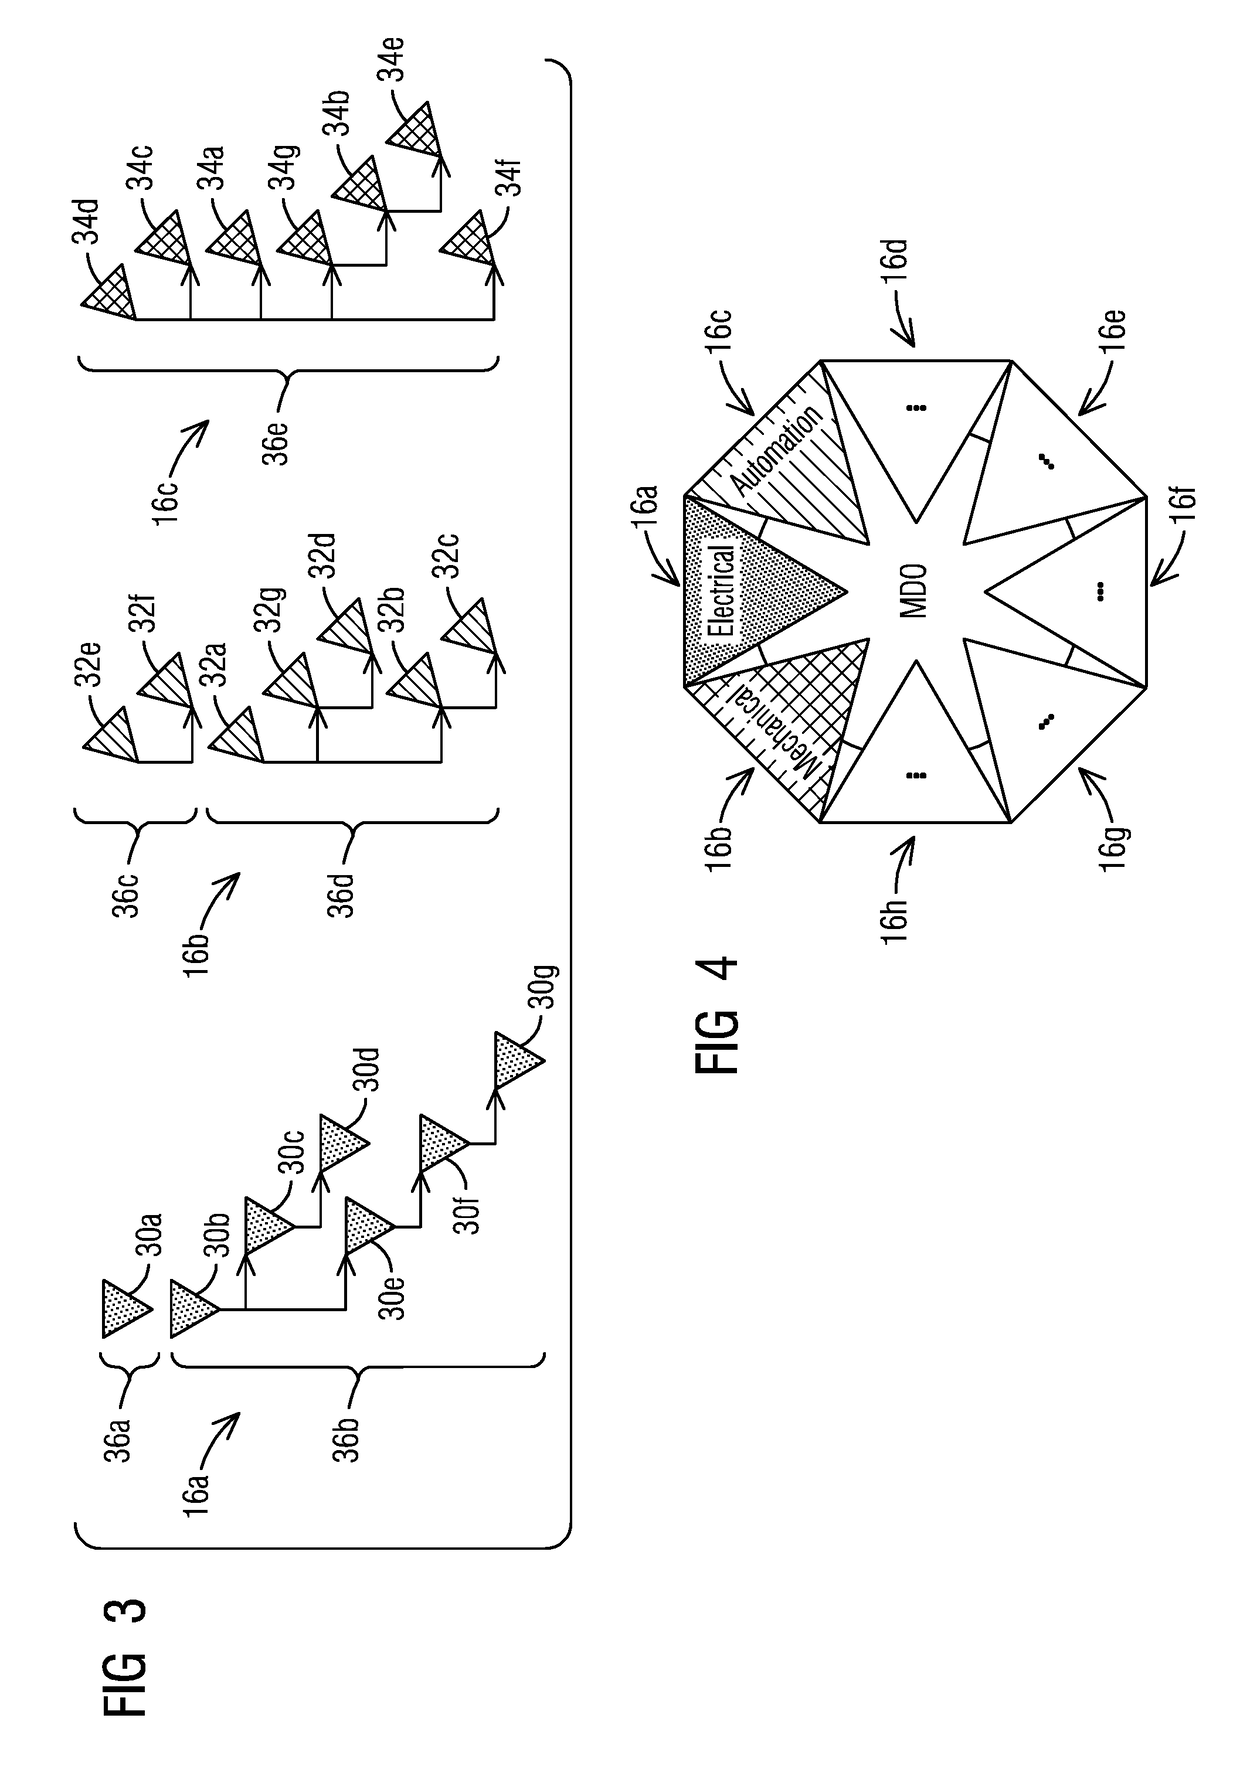 Visualization objects in a multi-discipline system